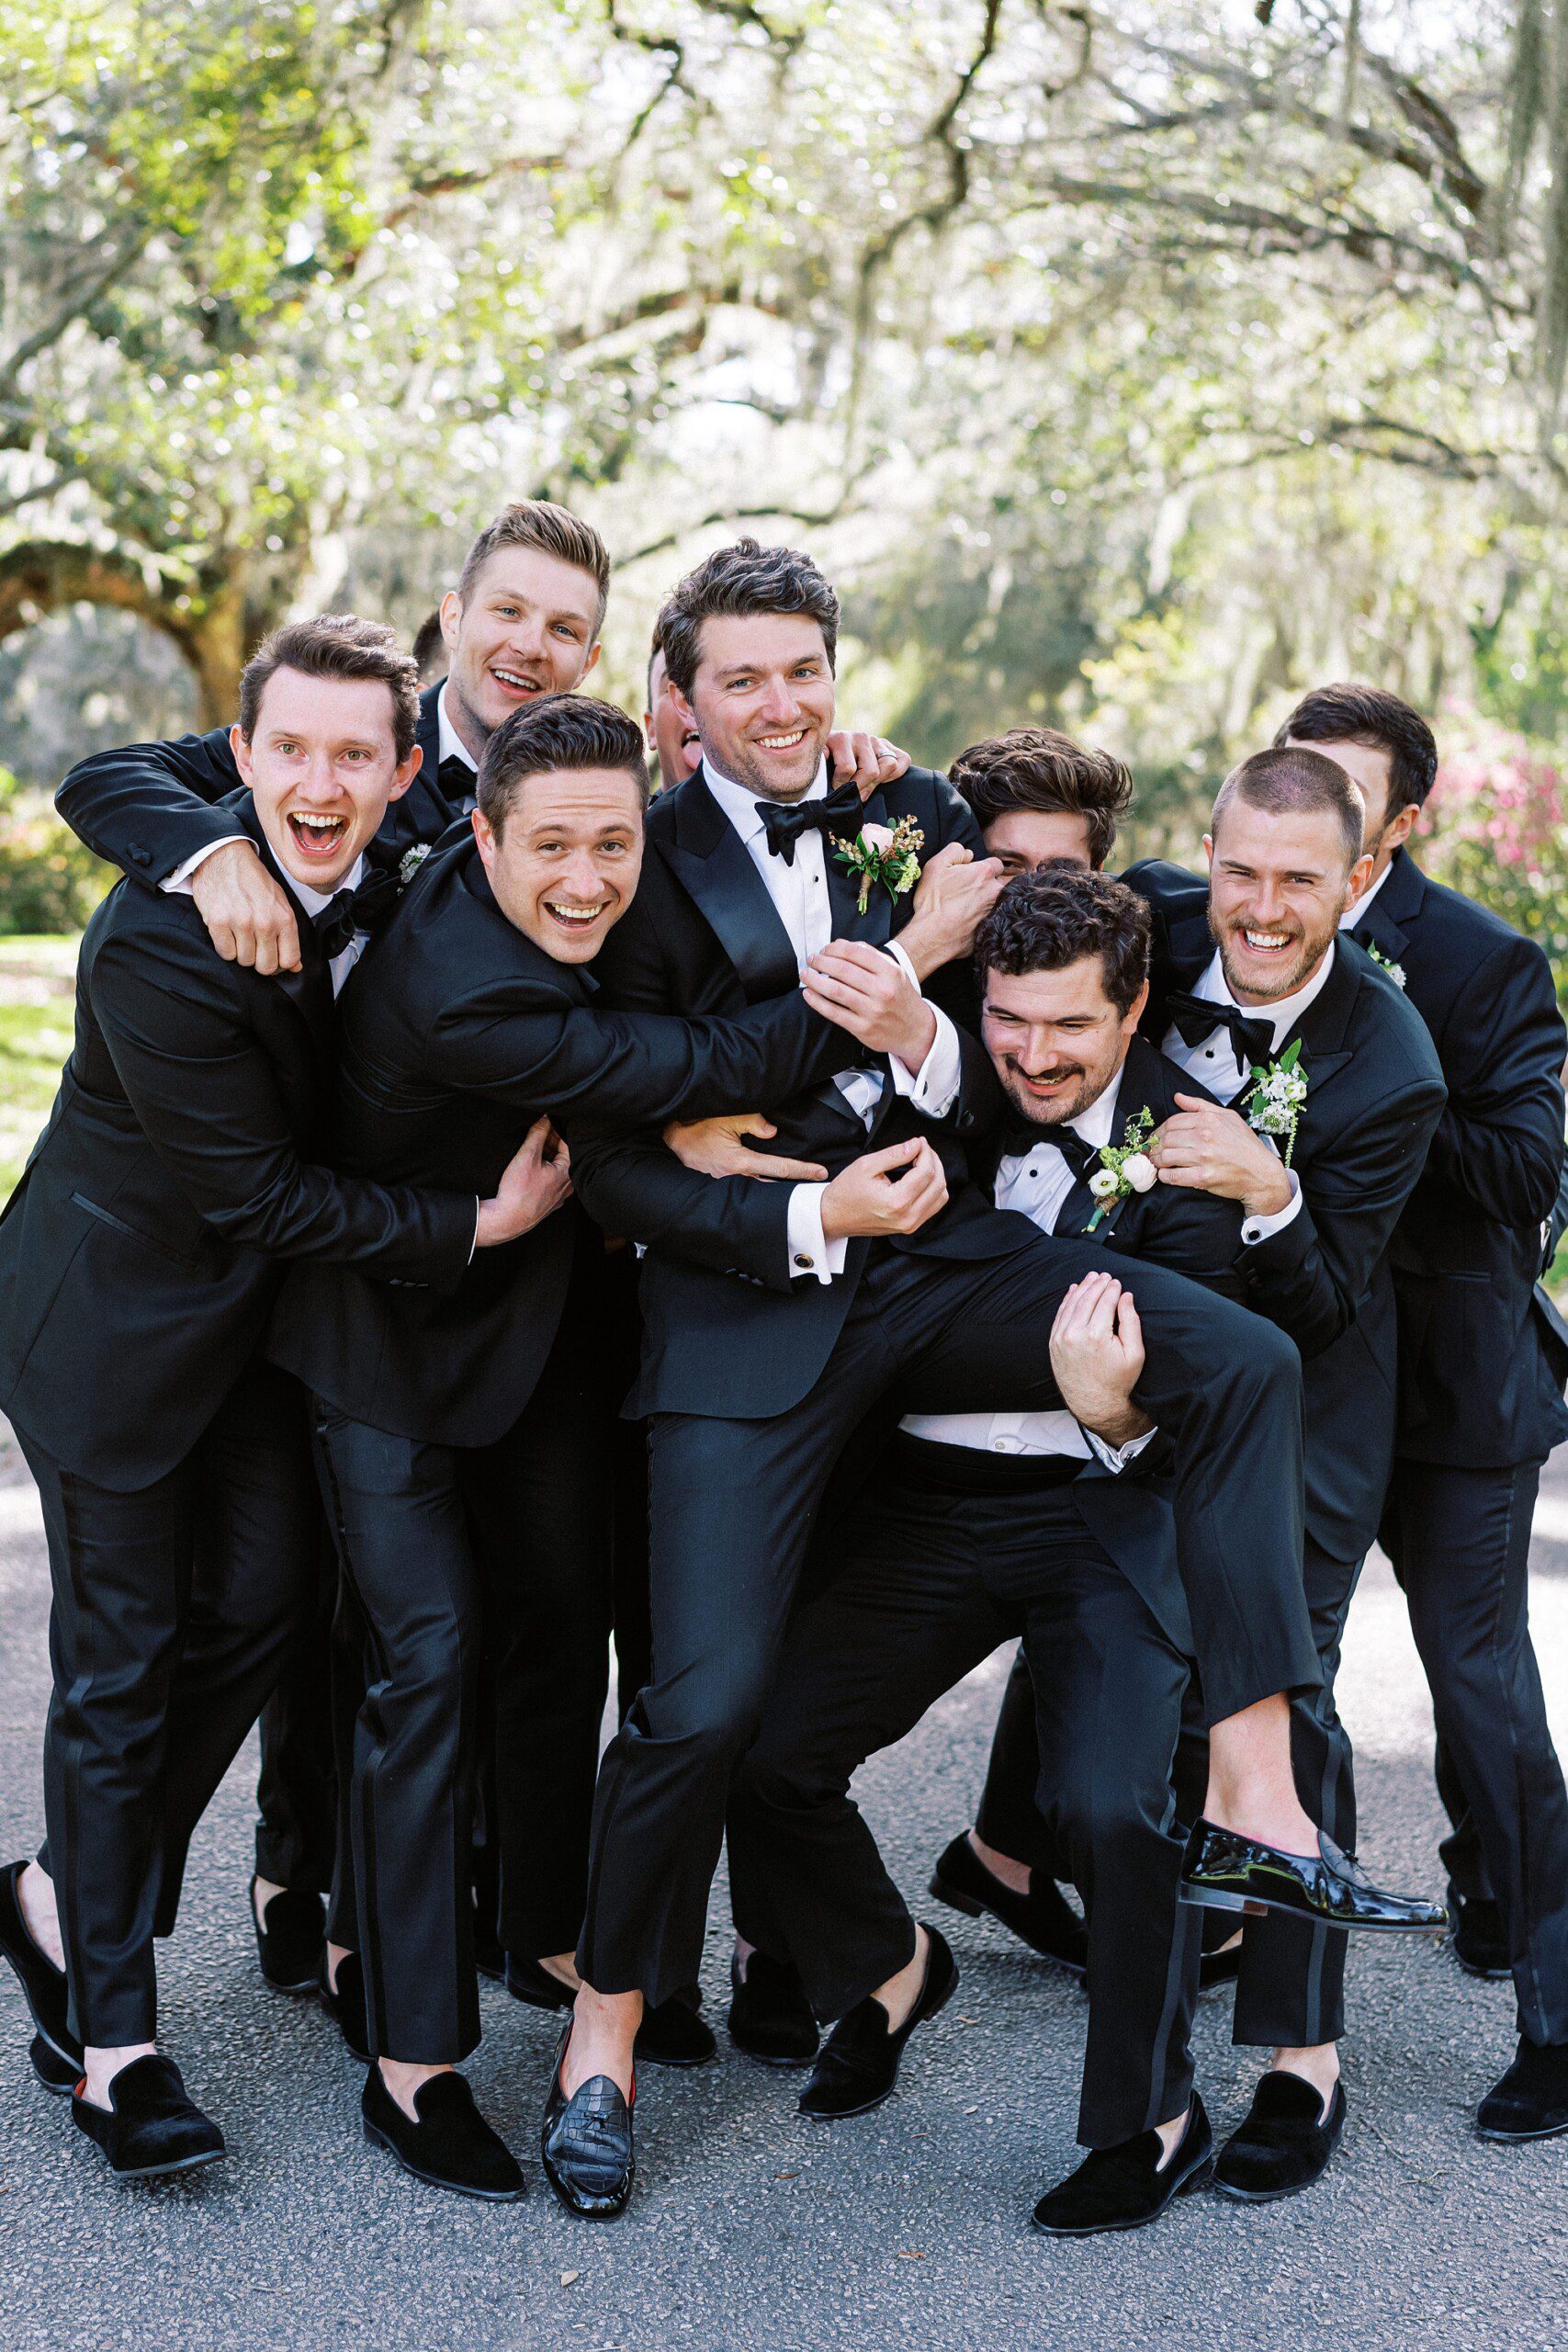 A stylish groom sharing a fun moment with his groomsmen at Magnolia Plantation and Gardens